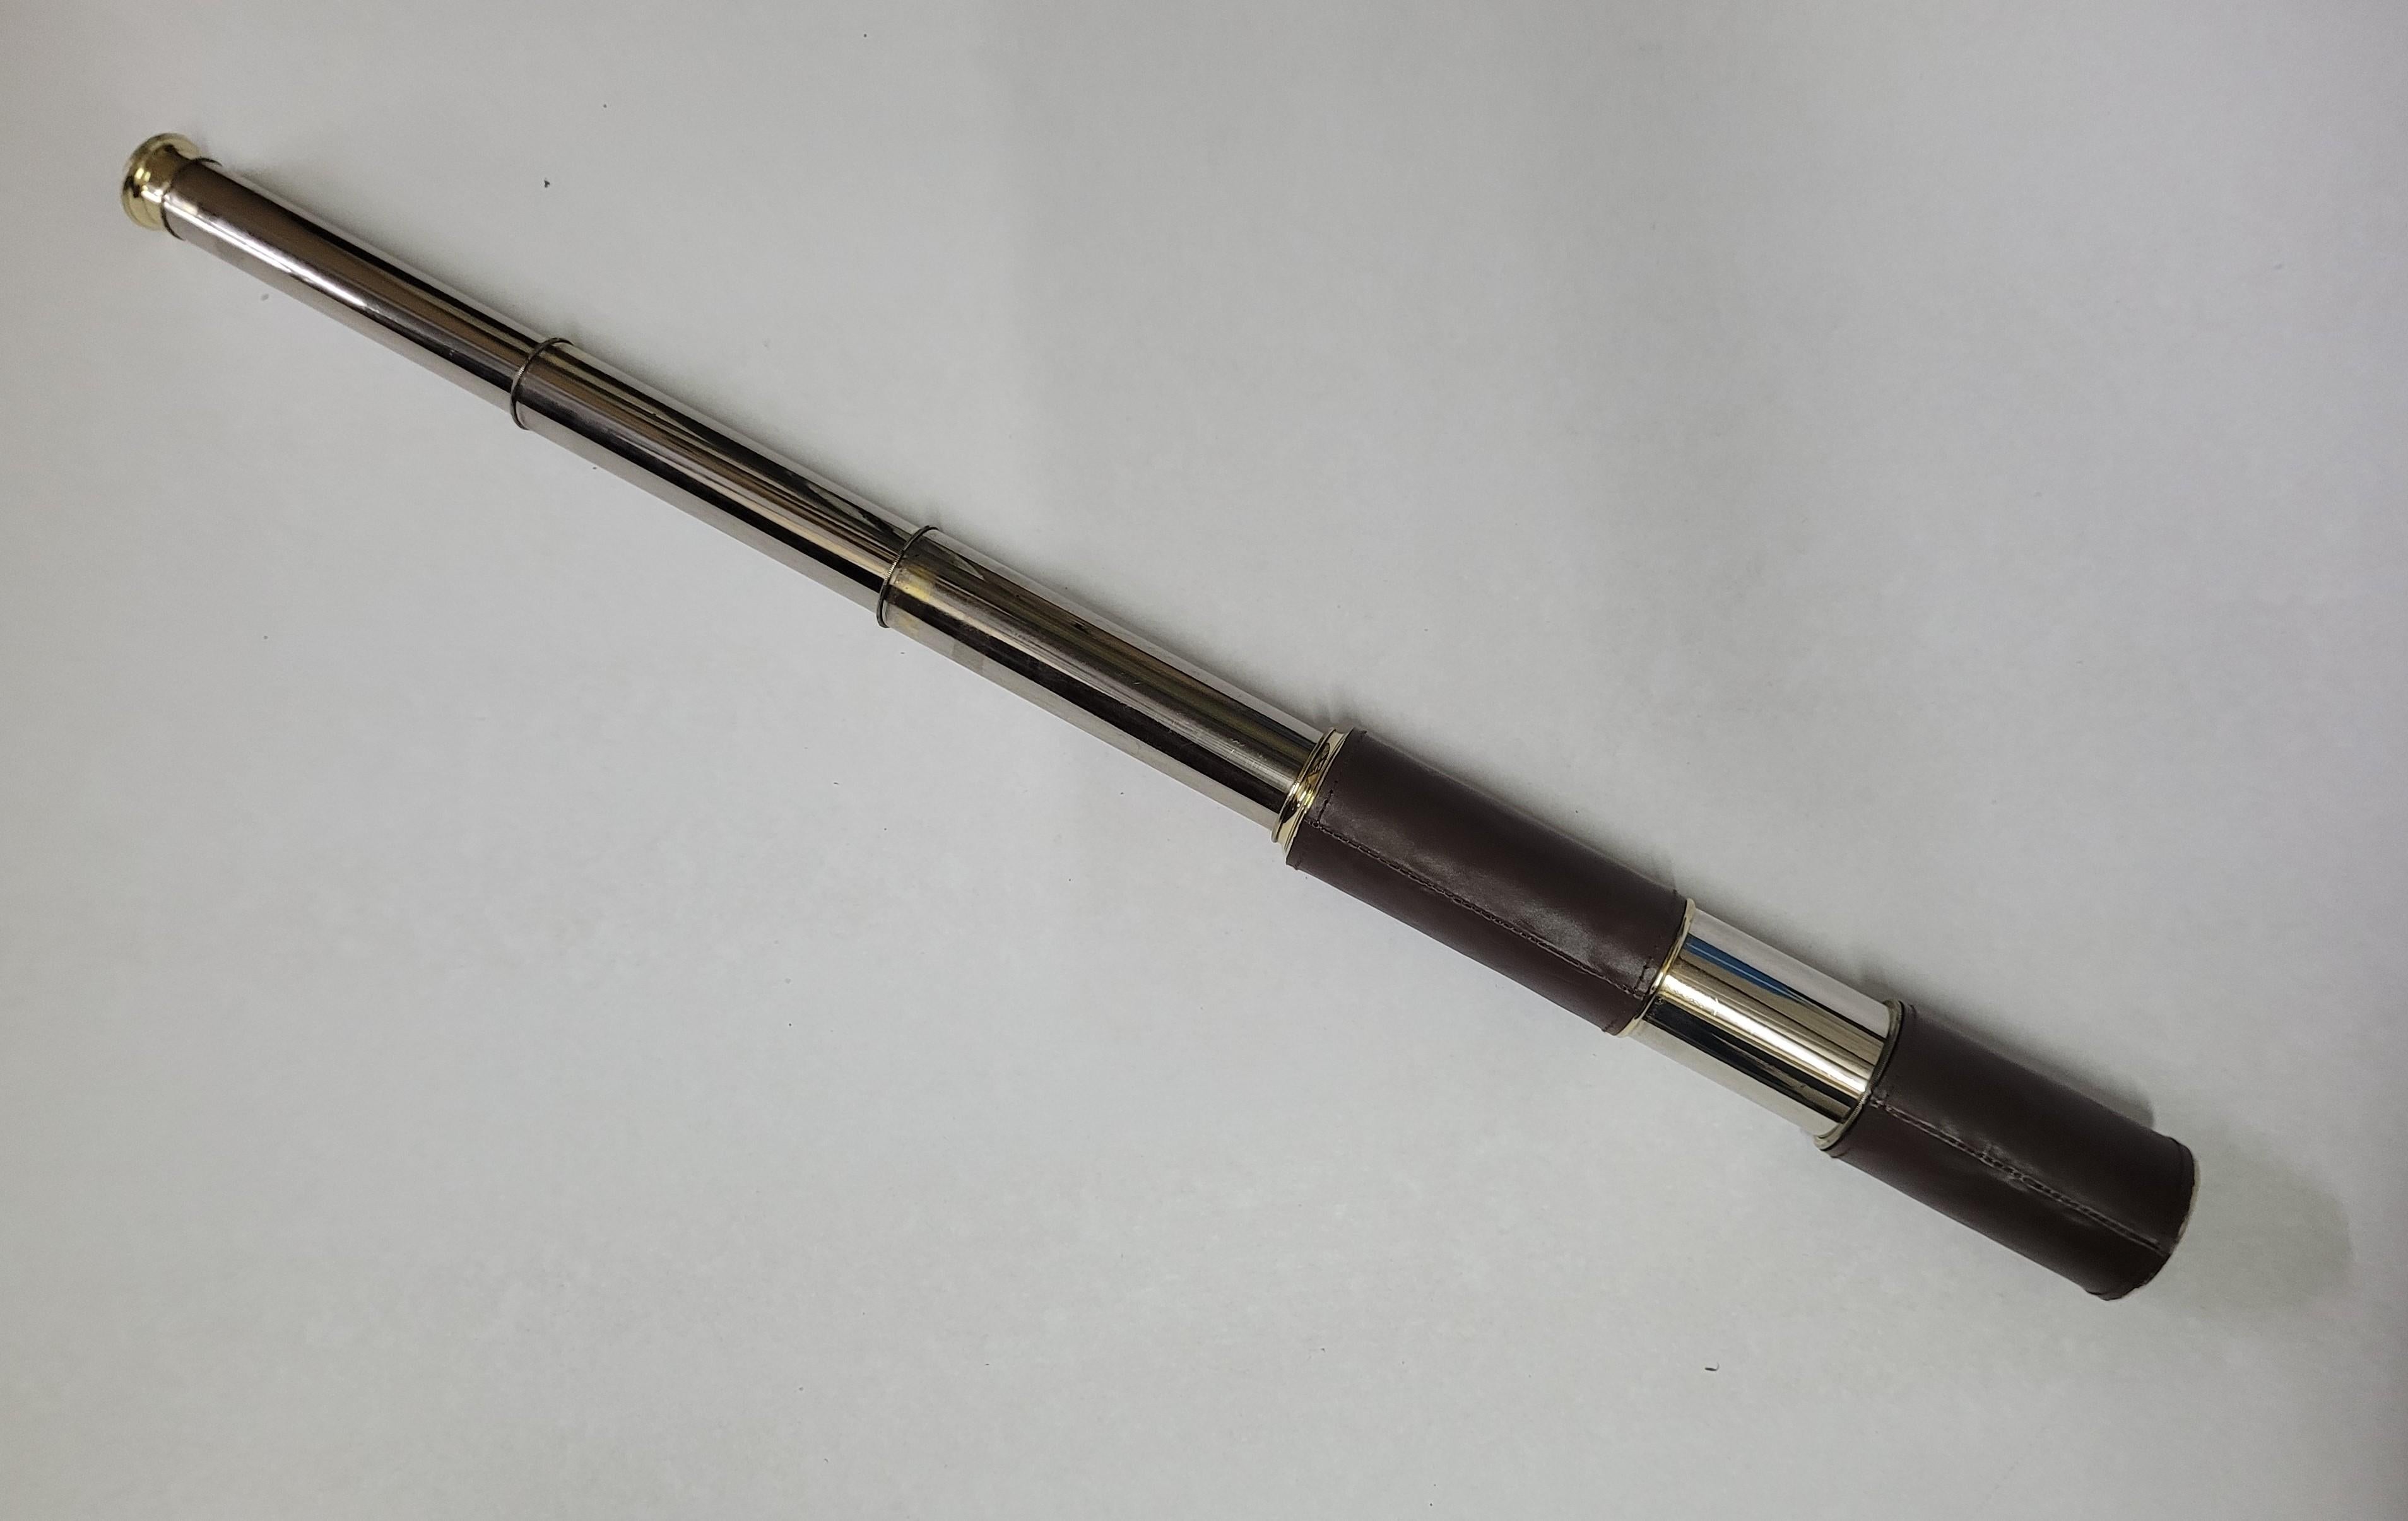 Ships spyglass telescope appropriate for use on a yacht, ship, or anywhere with a view. This has been meticulously polished and lacquered. We just restored a great collection of these. This fine instrument has a three draw barrel of brass with soft